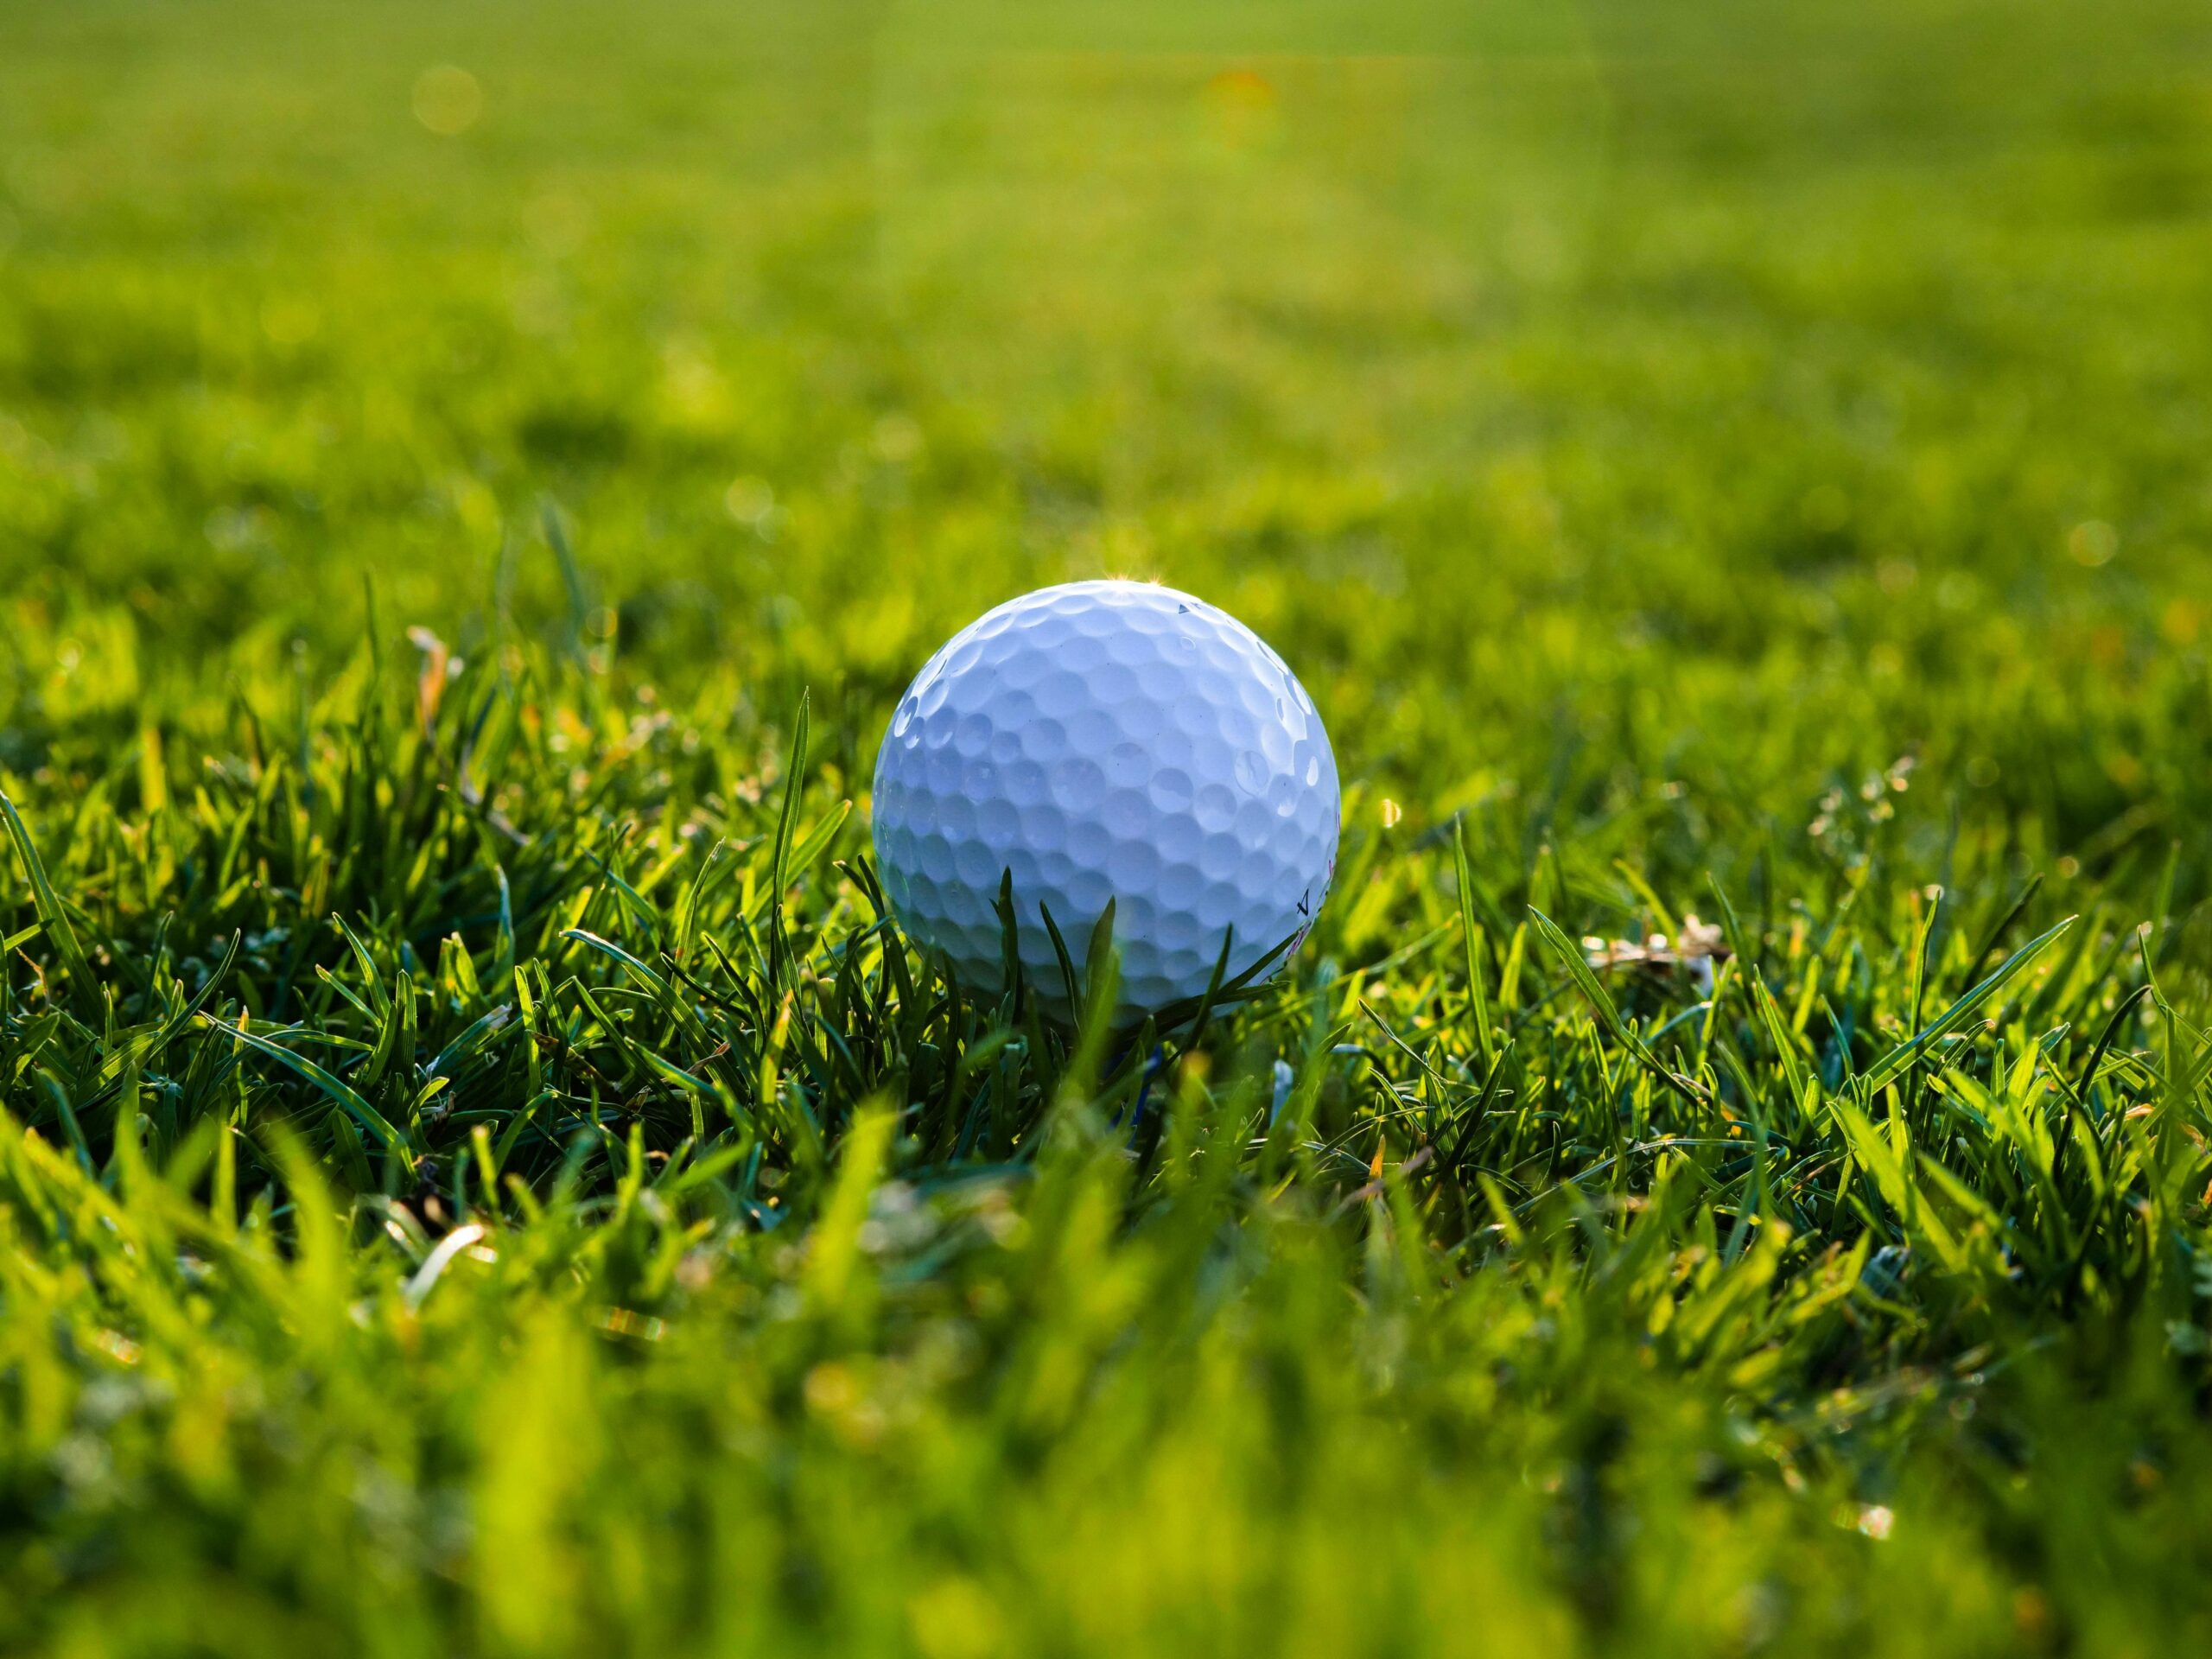 causes of slice in golf - golf ball in the grass